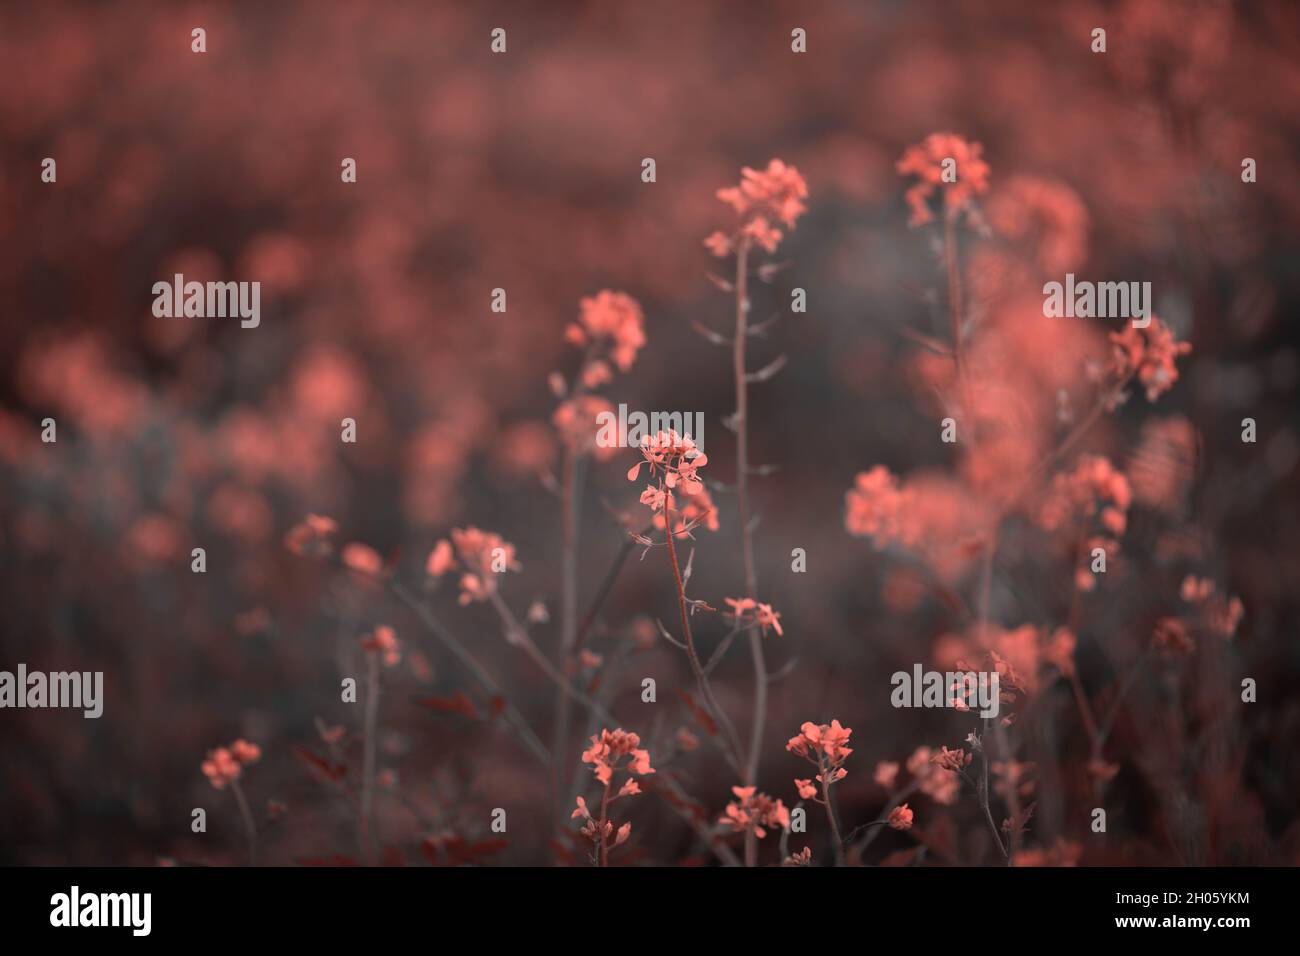 Color of the year 2019 Living Coral. Floral natural pattern of flowers. Popular trend palette for design illustrations, fabrics, fashion, images. Tint Stock Photo